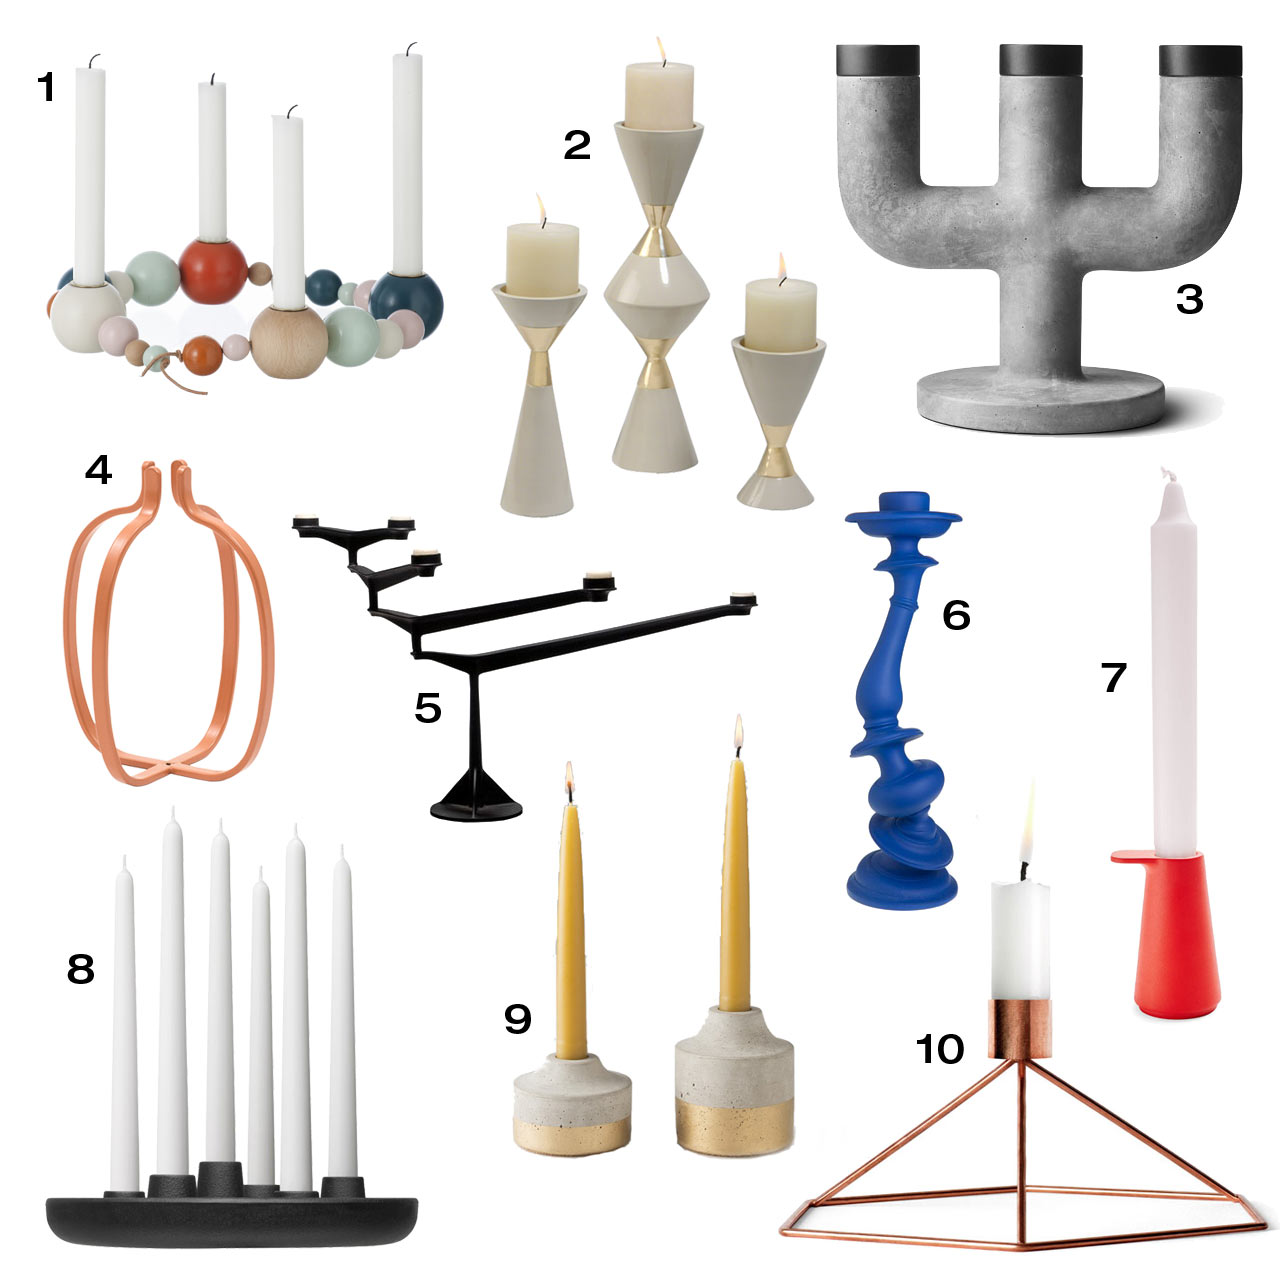 10 Modern Candle Holders to Complete Your Table Centerpiece